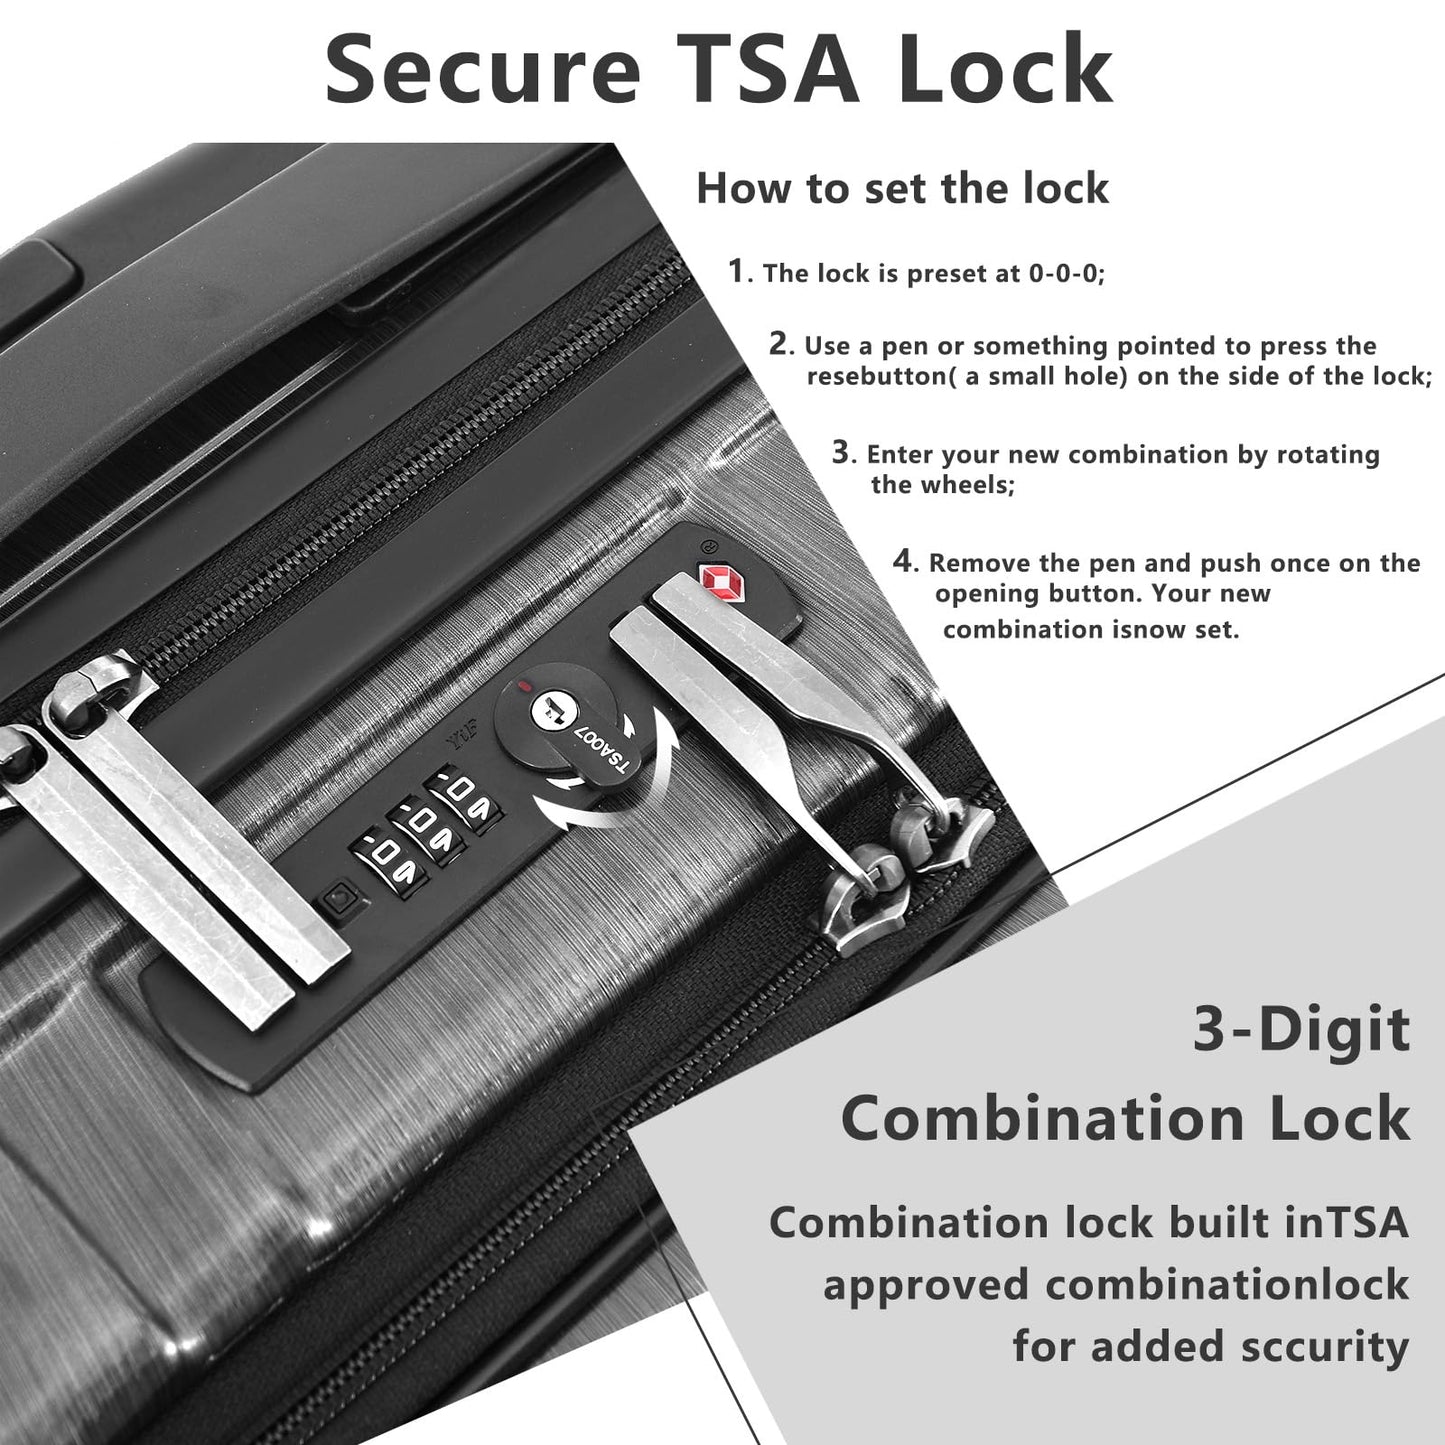 Carry On 55x35x23cm Cabin Luggage 20 Inch with Front Compartment, Lightweight ABS+PC Hardshell Suitcase with Dual Control TSA Lock, YKK Zipper, 4 Spinner Silent Wheels, Silver Grey